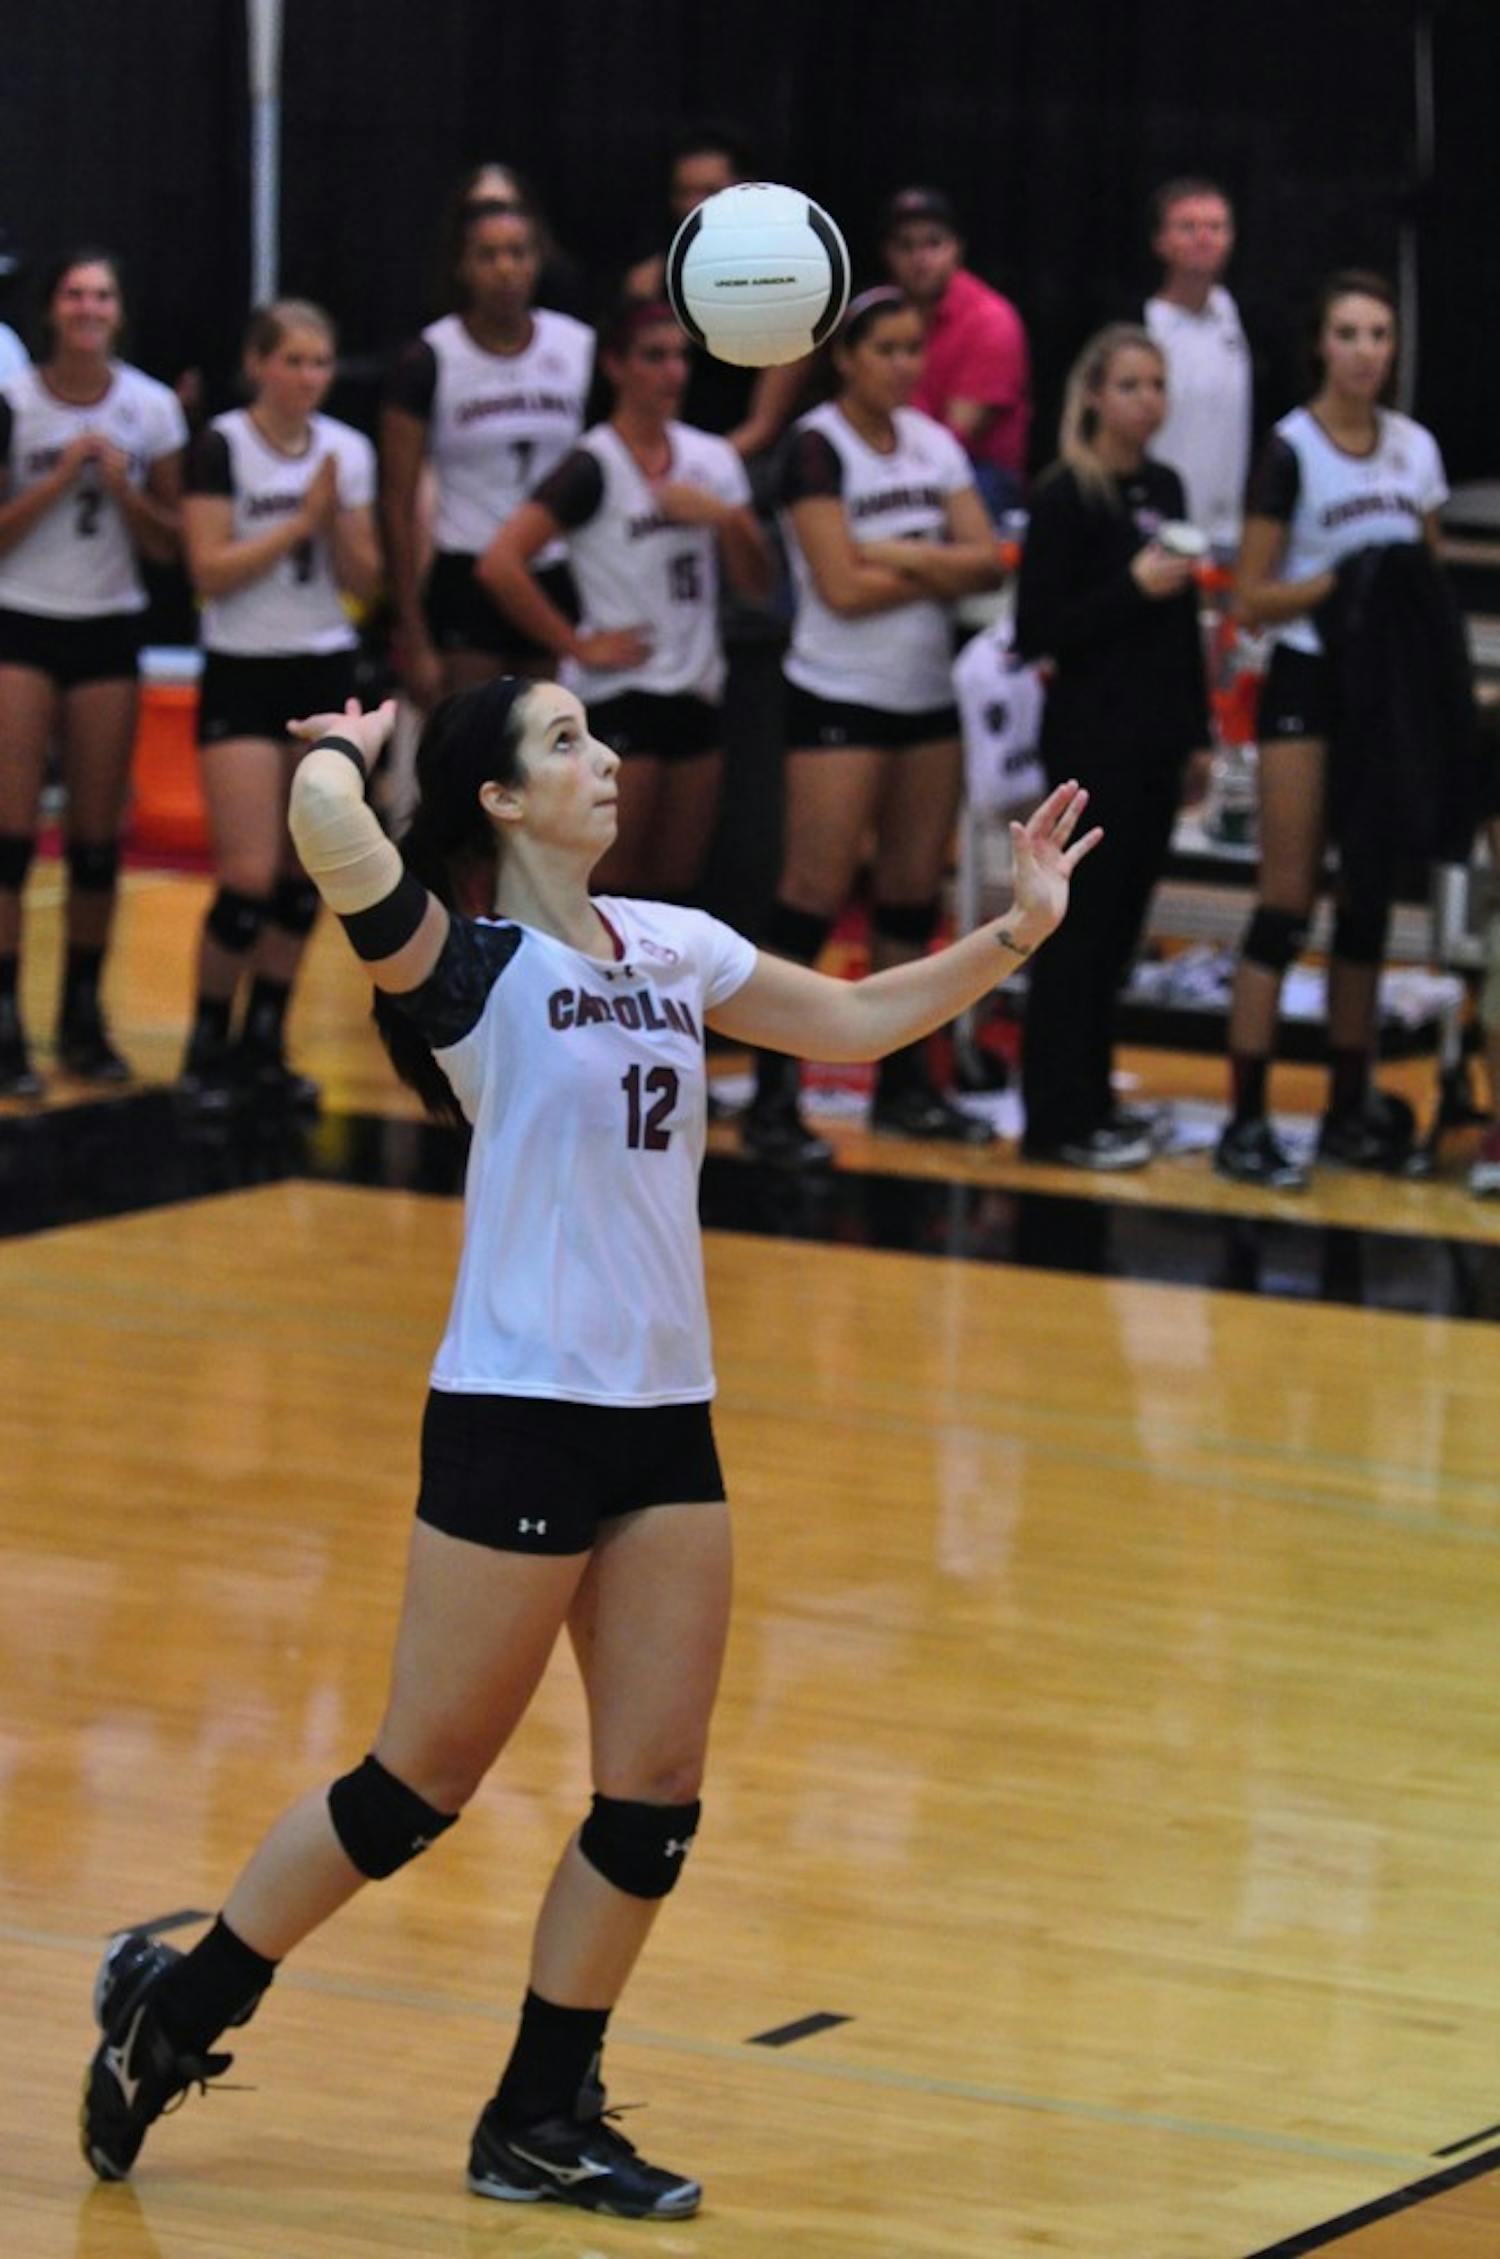 	Senior Juliette Thevenin recorded her 1,500th career kill Sunday. The number is third all-time in Gamecock history.